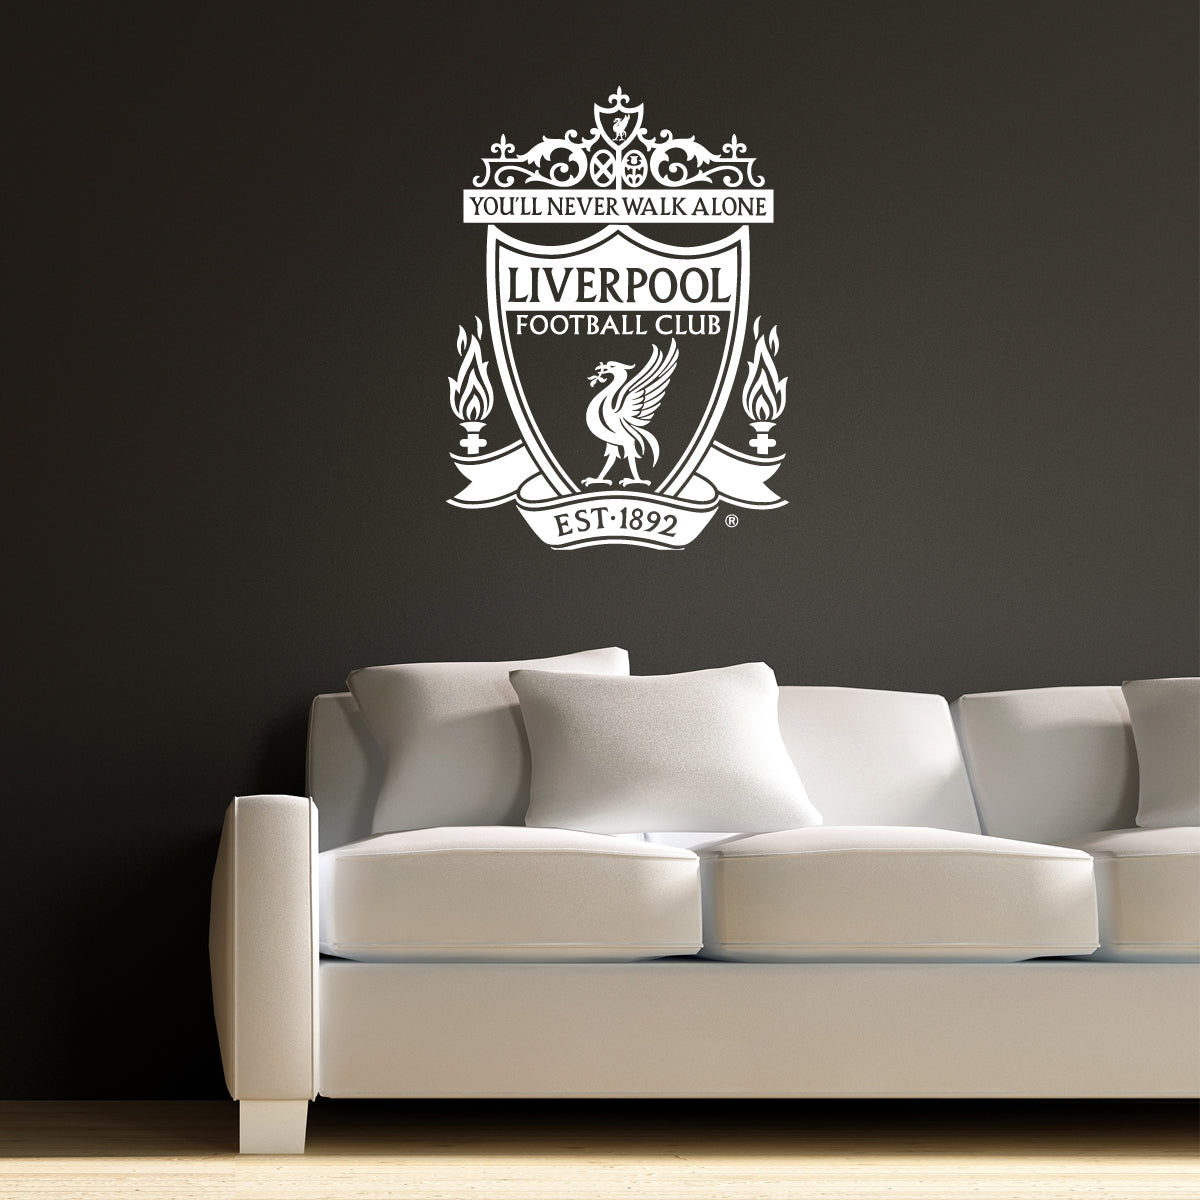 Liverpool Football Club - One Colour Crest Wall Decal + LFC Wall Sticker Set